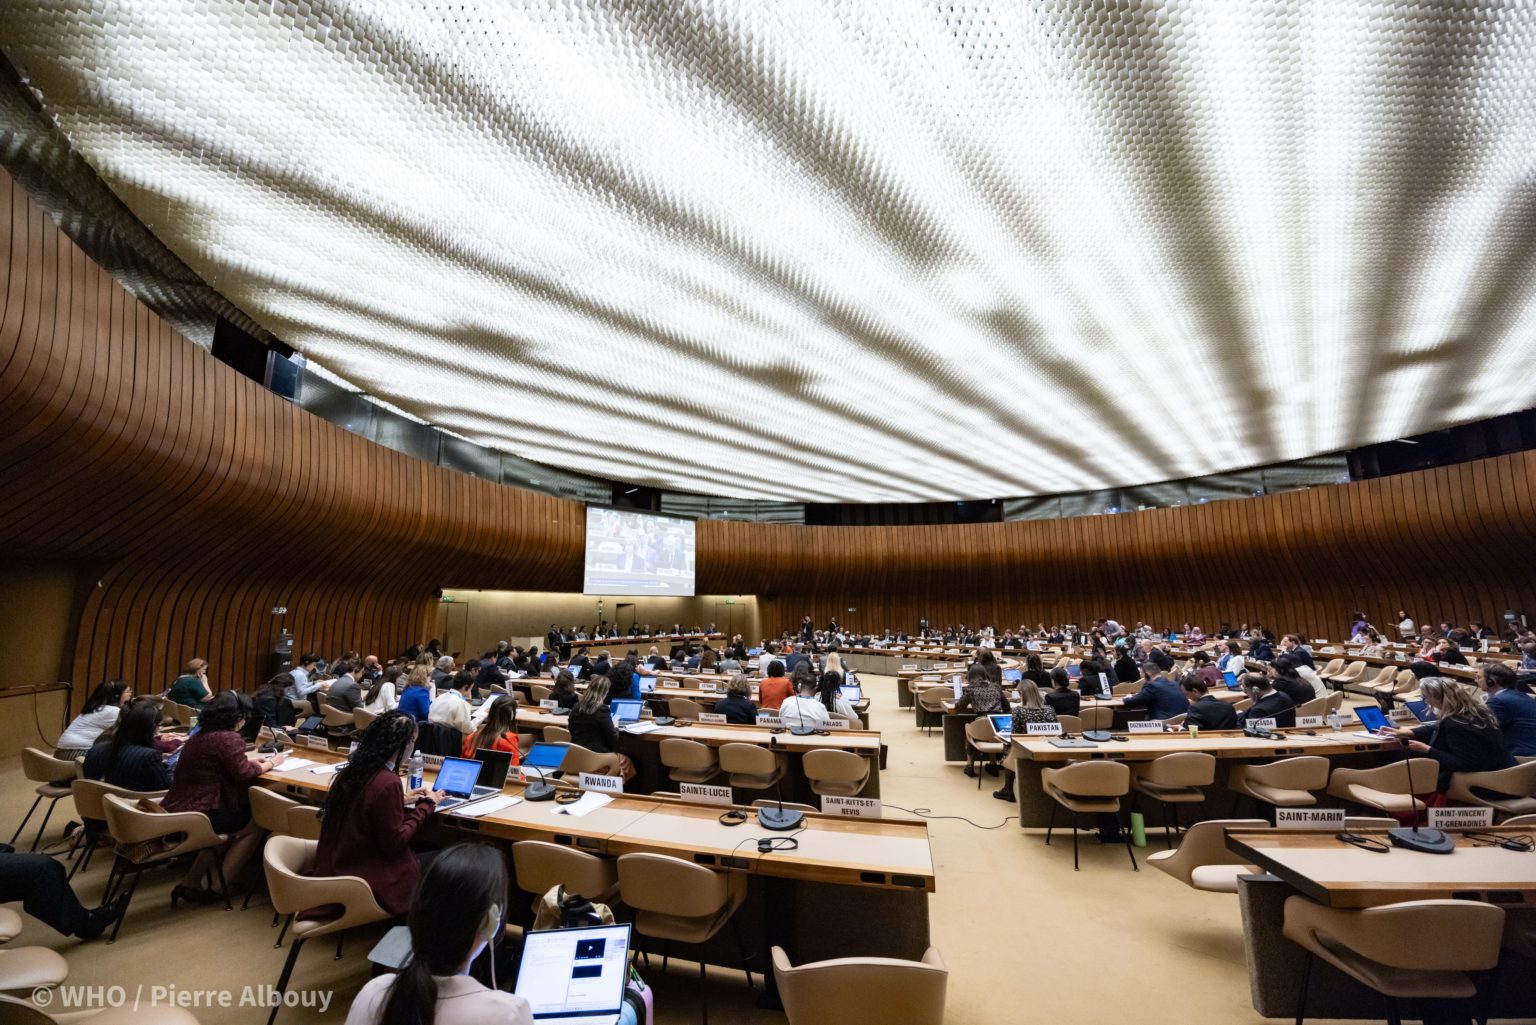 77th WHA: WHO urges more investment in universal health coverage despite funding hurdles